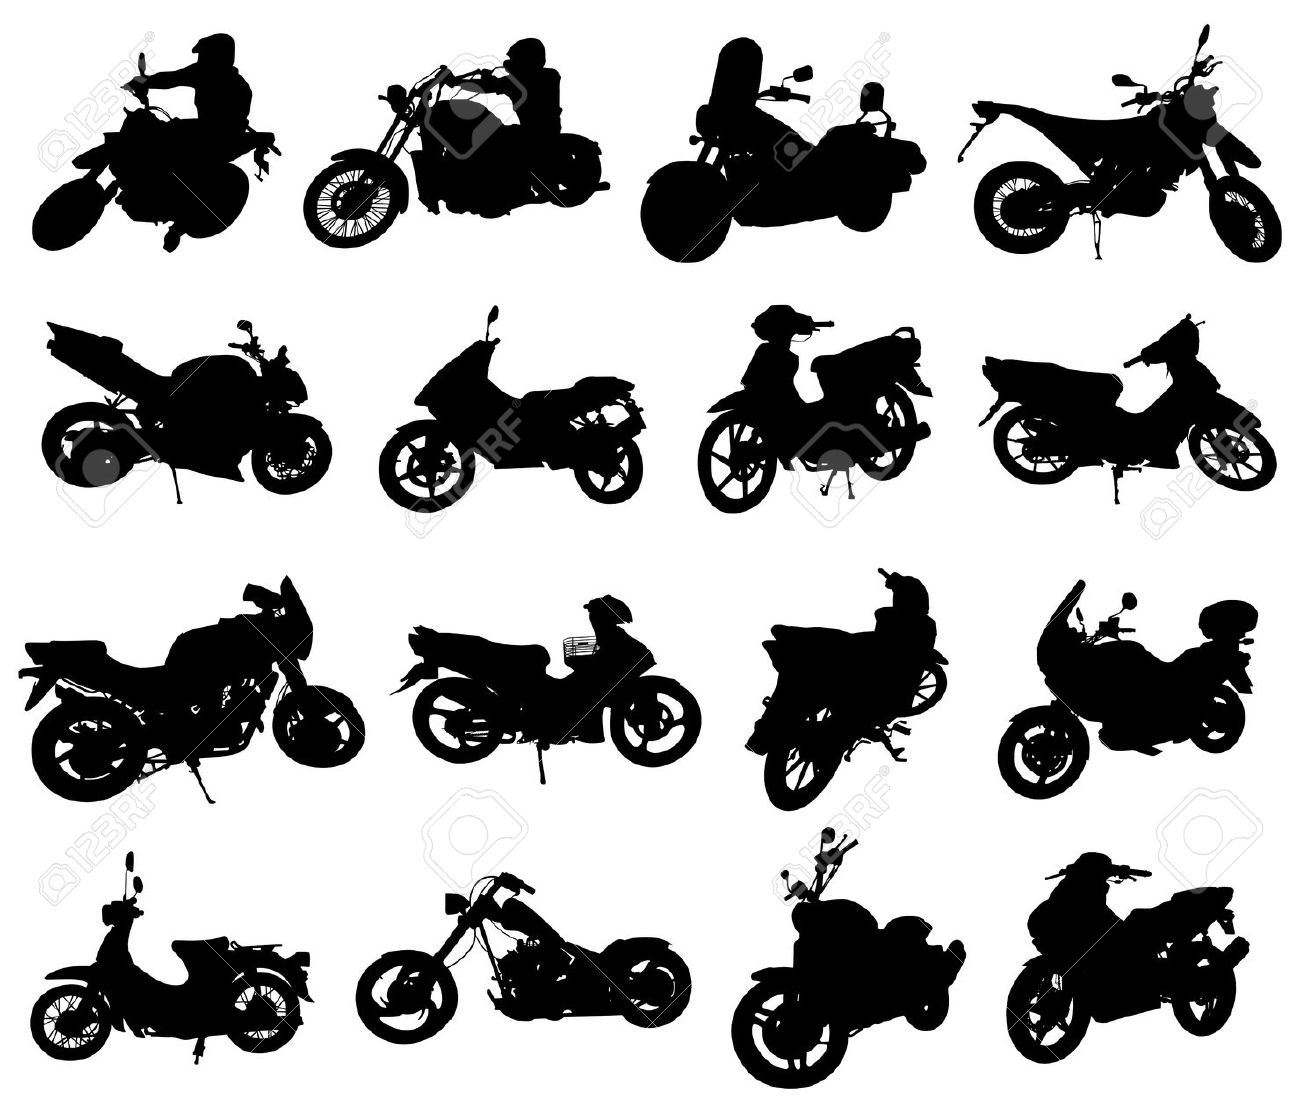 Download Motorcycle Rider Silhouette Vector at Vectorified.com | Collection of Motorcycle Rider ...